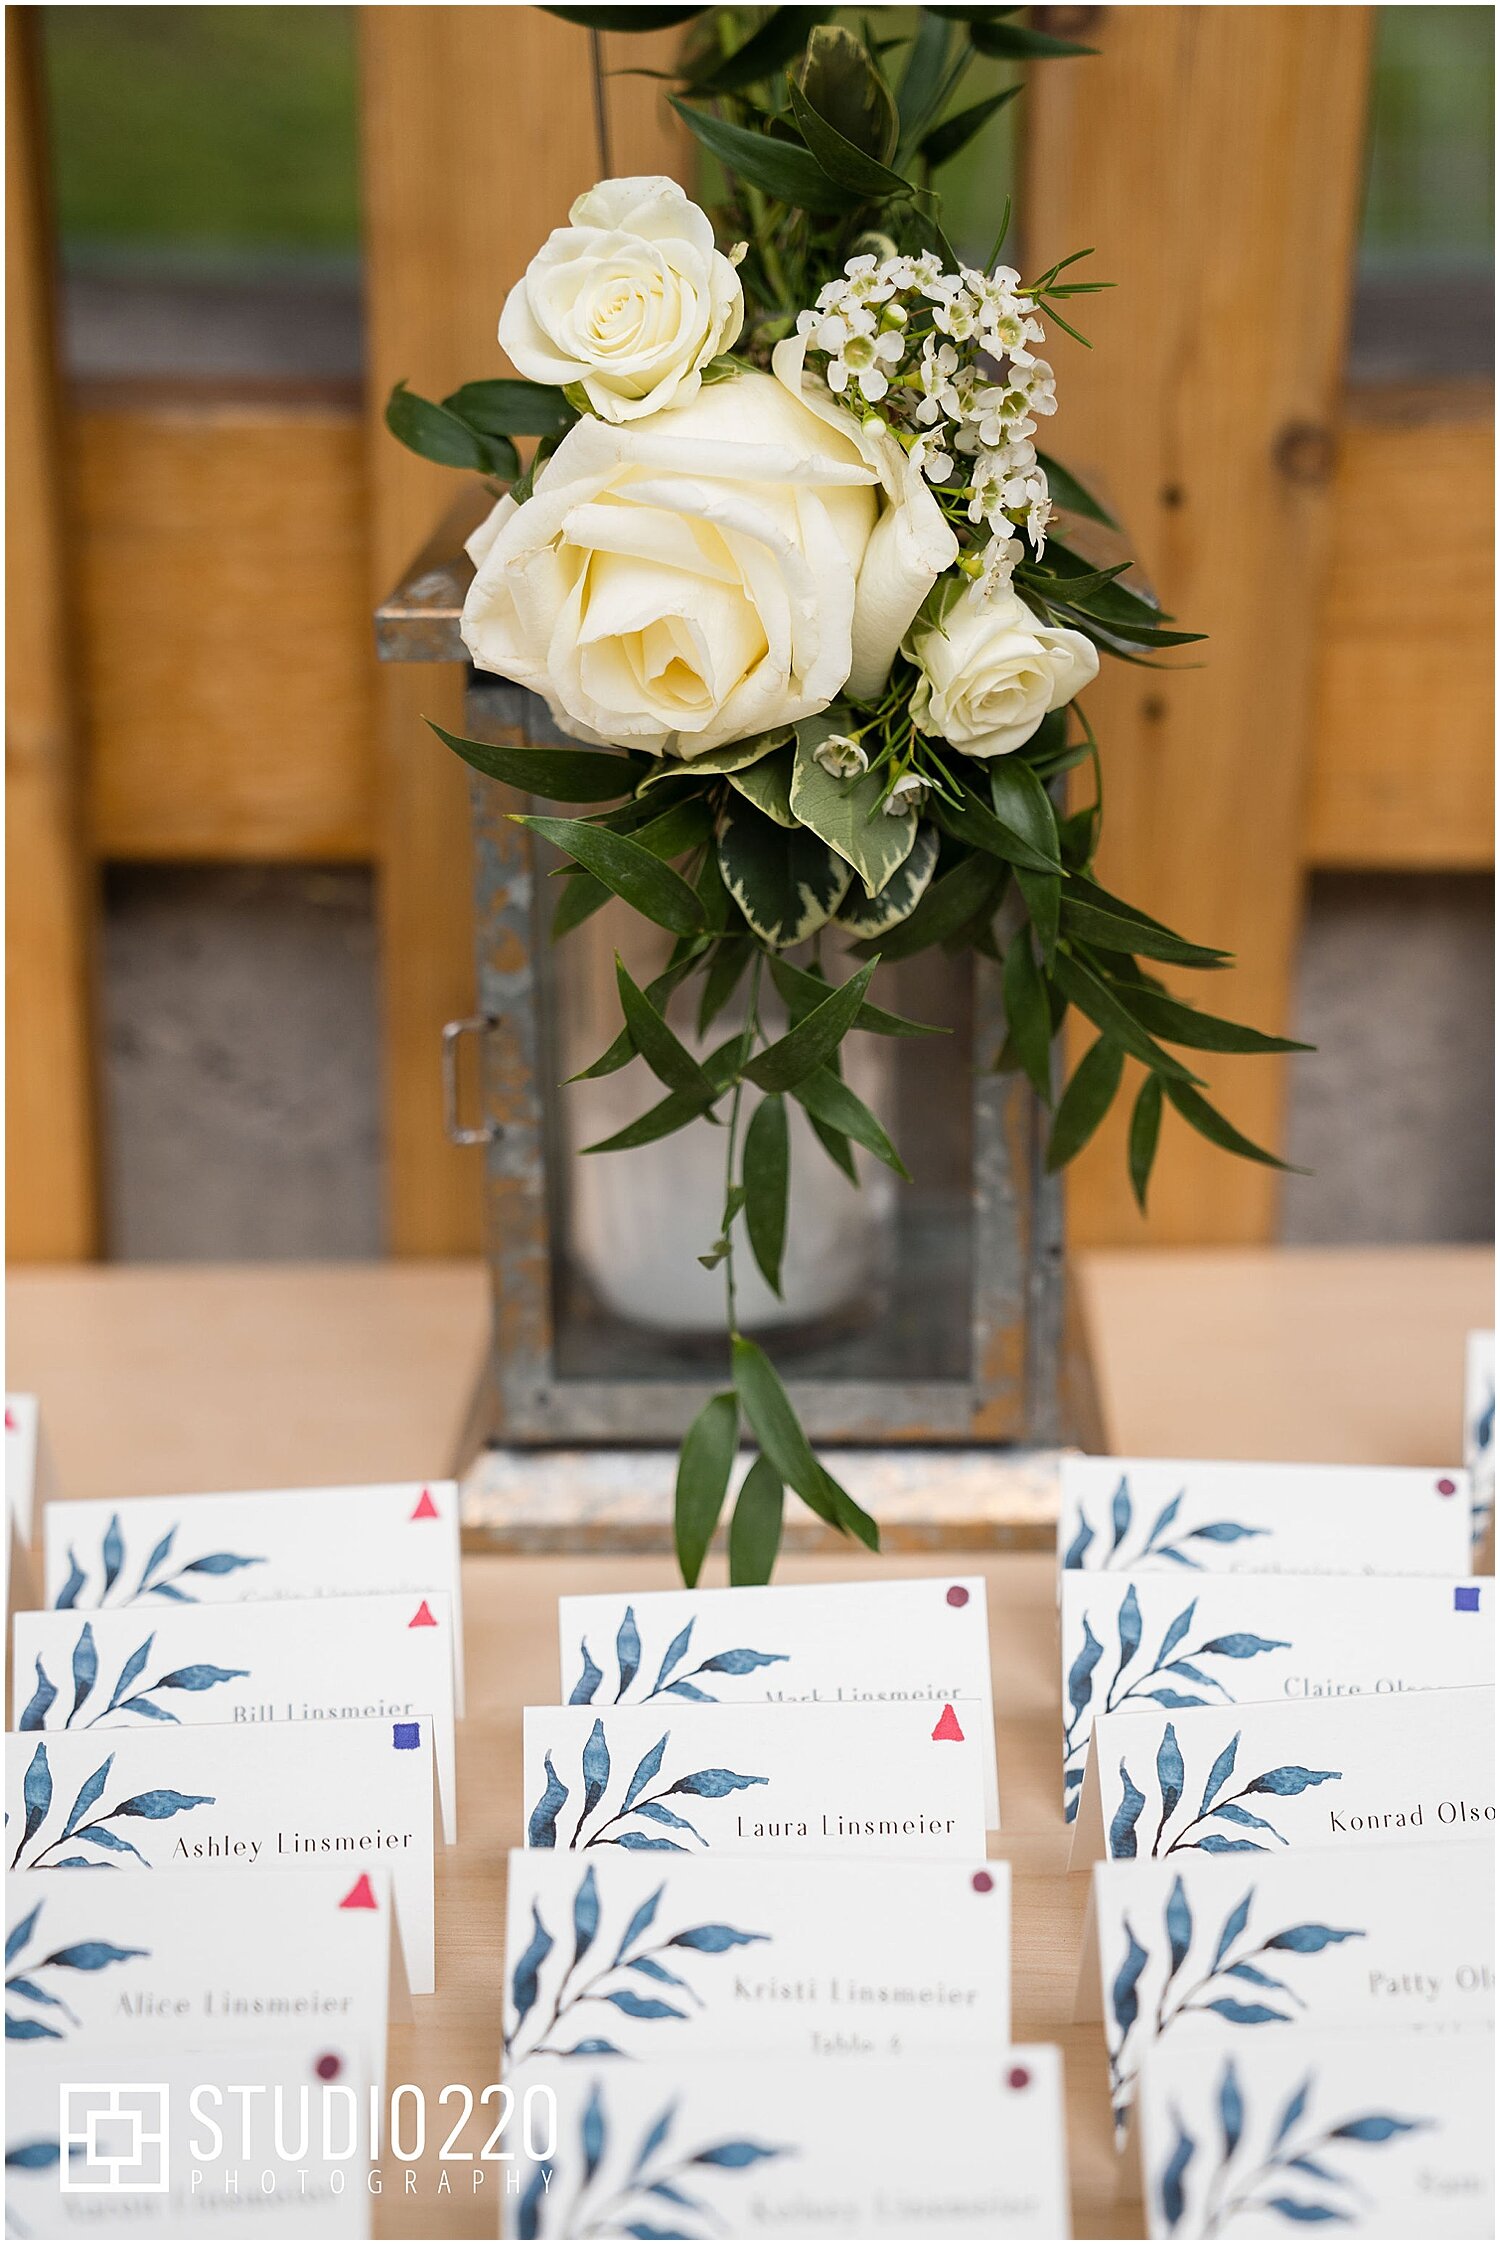  Name tags for wedding guests  